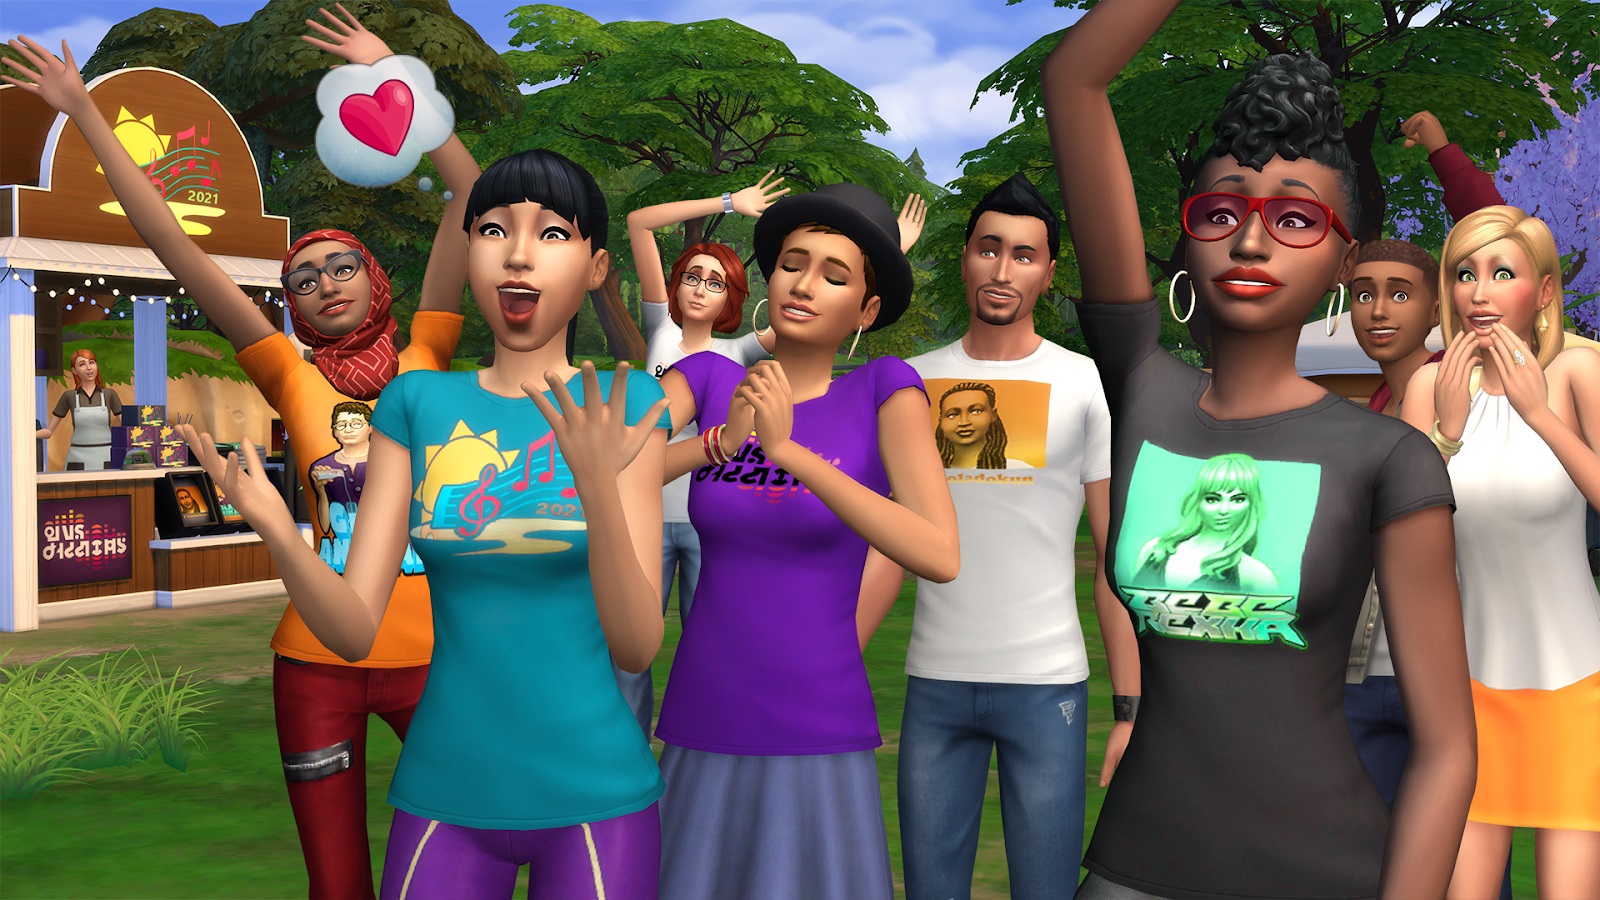 The Sims 4 is hosting its first ingame musical festival featuring real